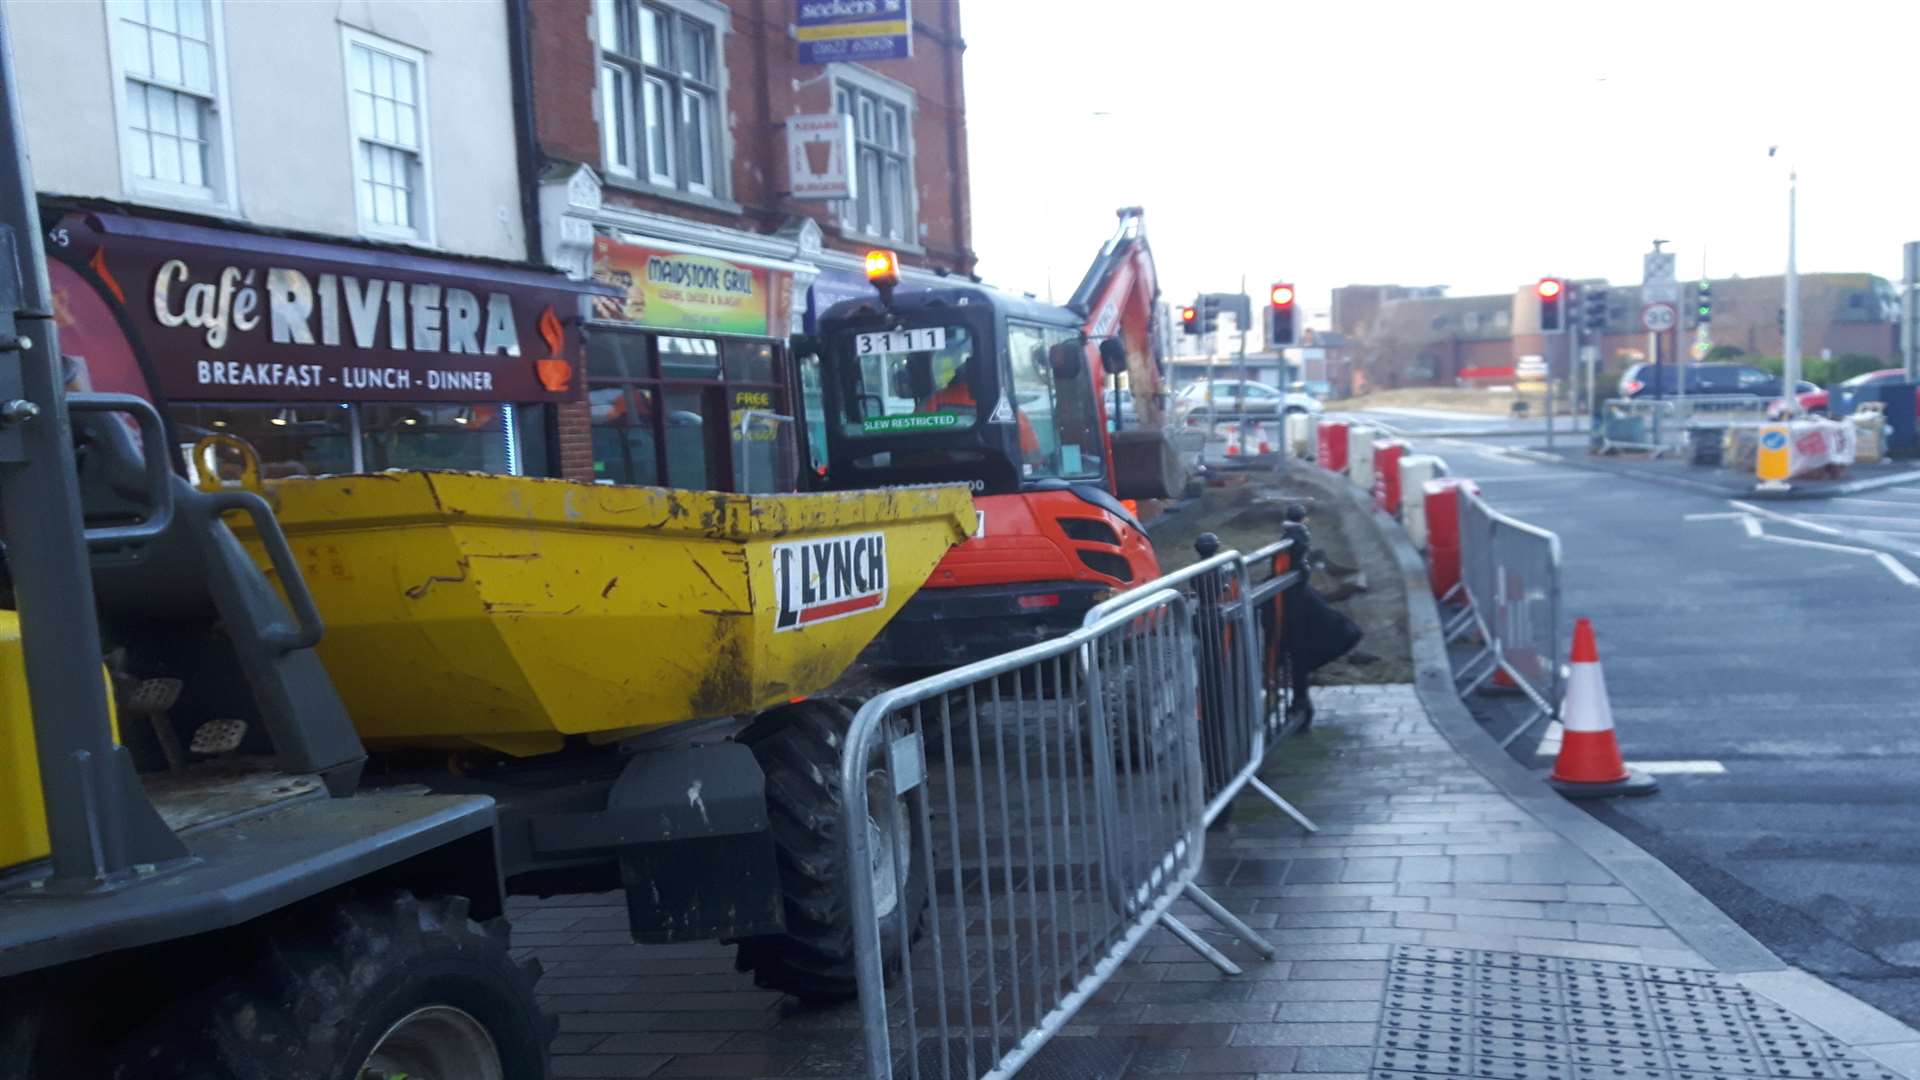 Work has started on relaying the paving at the bottom of the High Street